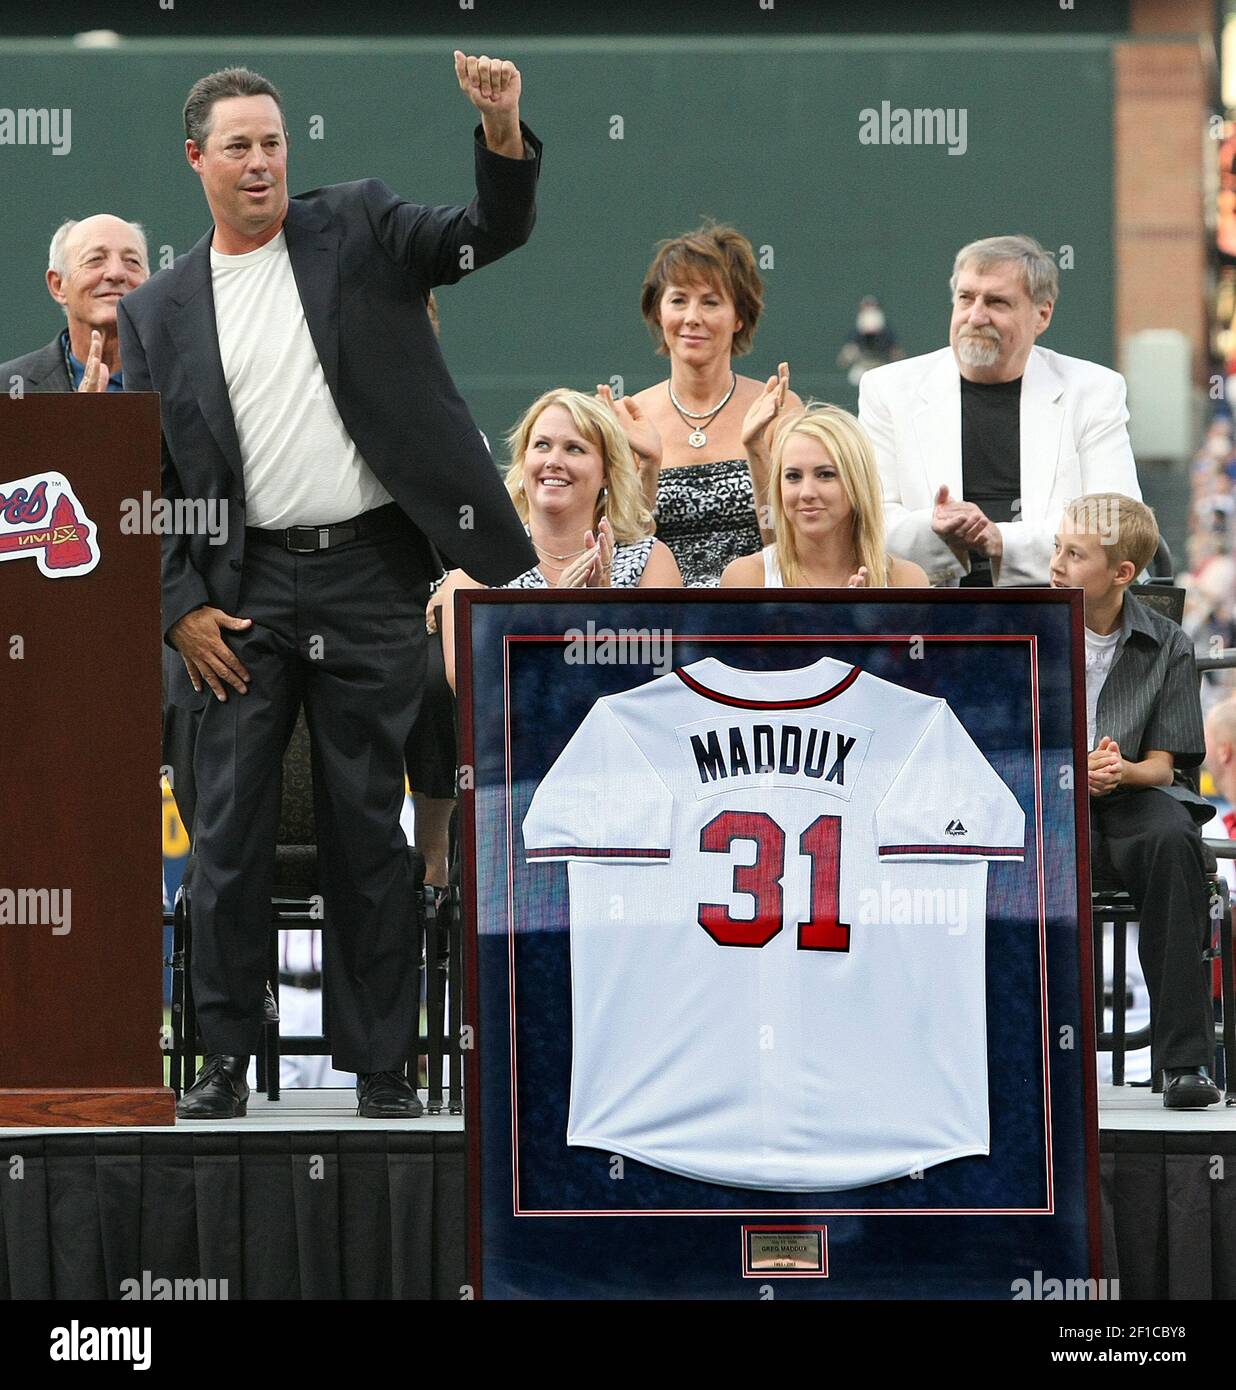 Former Atlanta Braves pitcher Greg Maddux reacts as his jersey is retired  before the Braves game against the New York Mets at Turner Field in  Atlanta, Georgia, Friday, July 17, 2009. (Photo